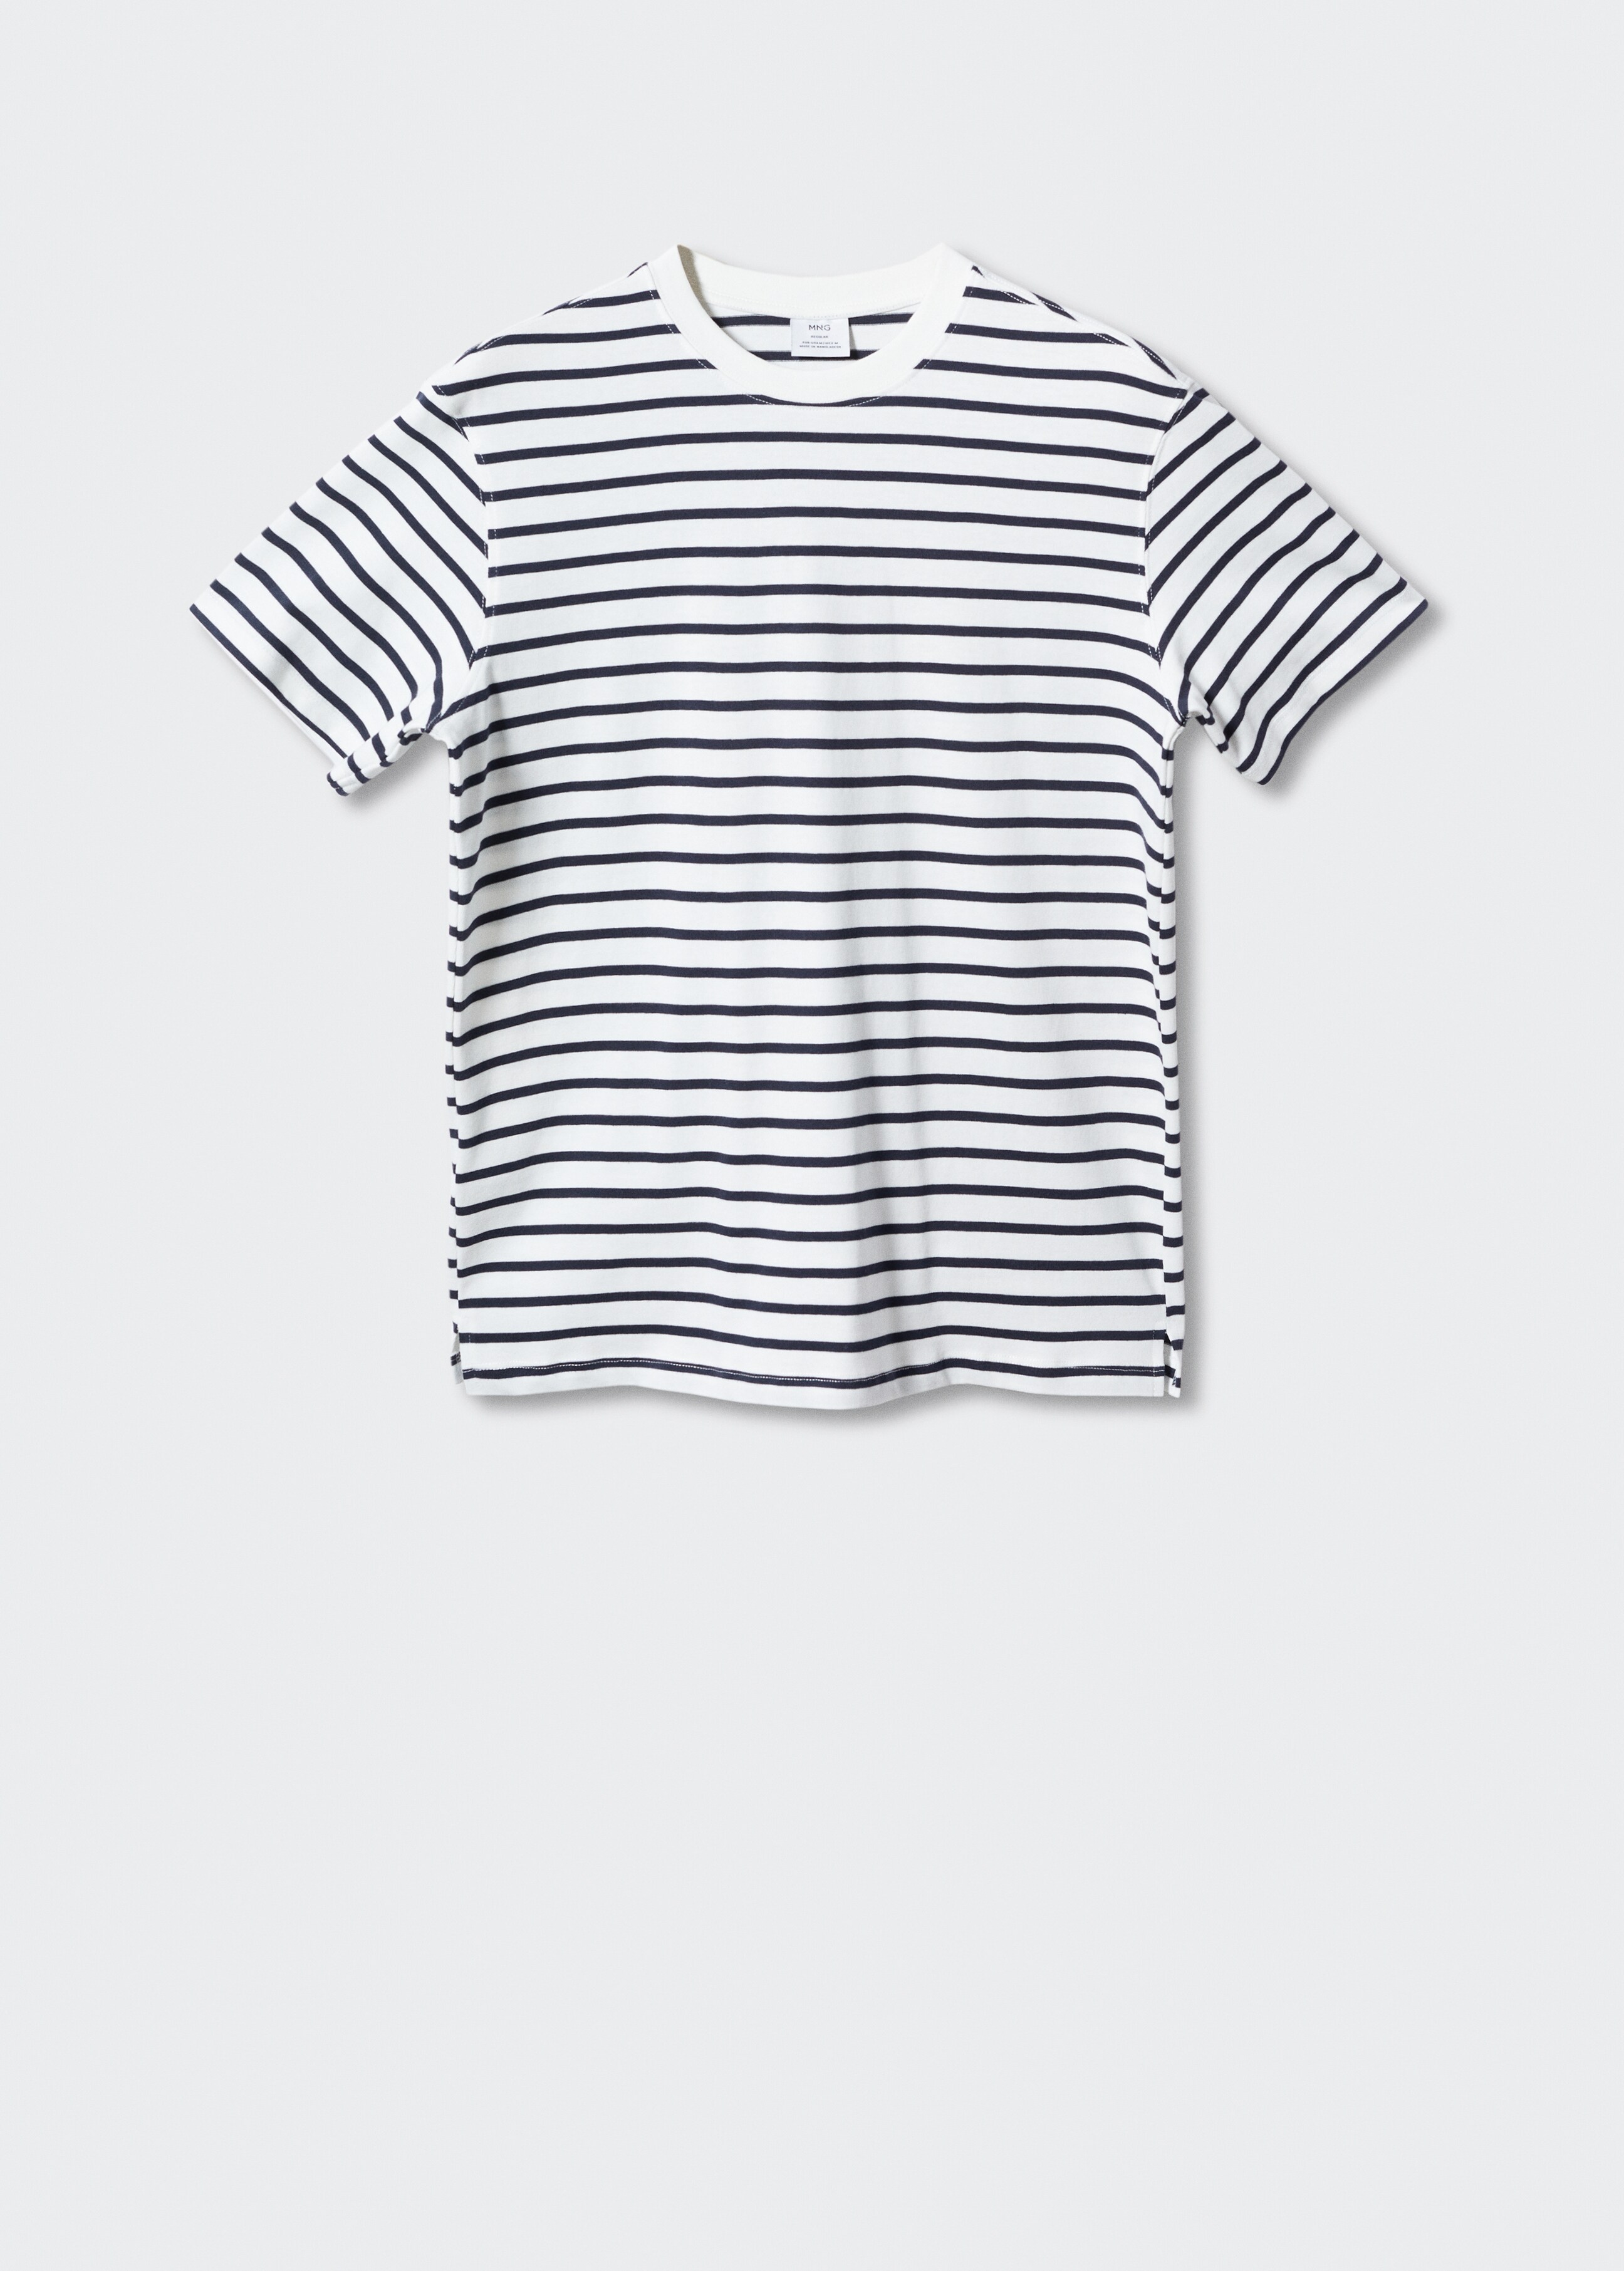 Striped cotton T-shirt - Article without model